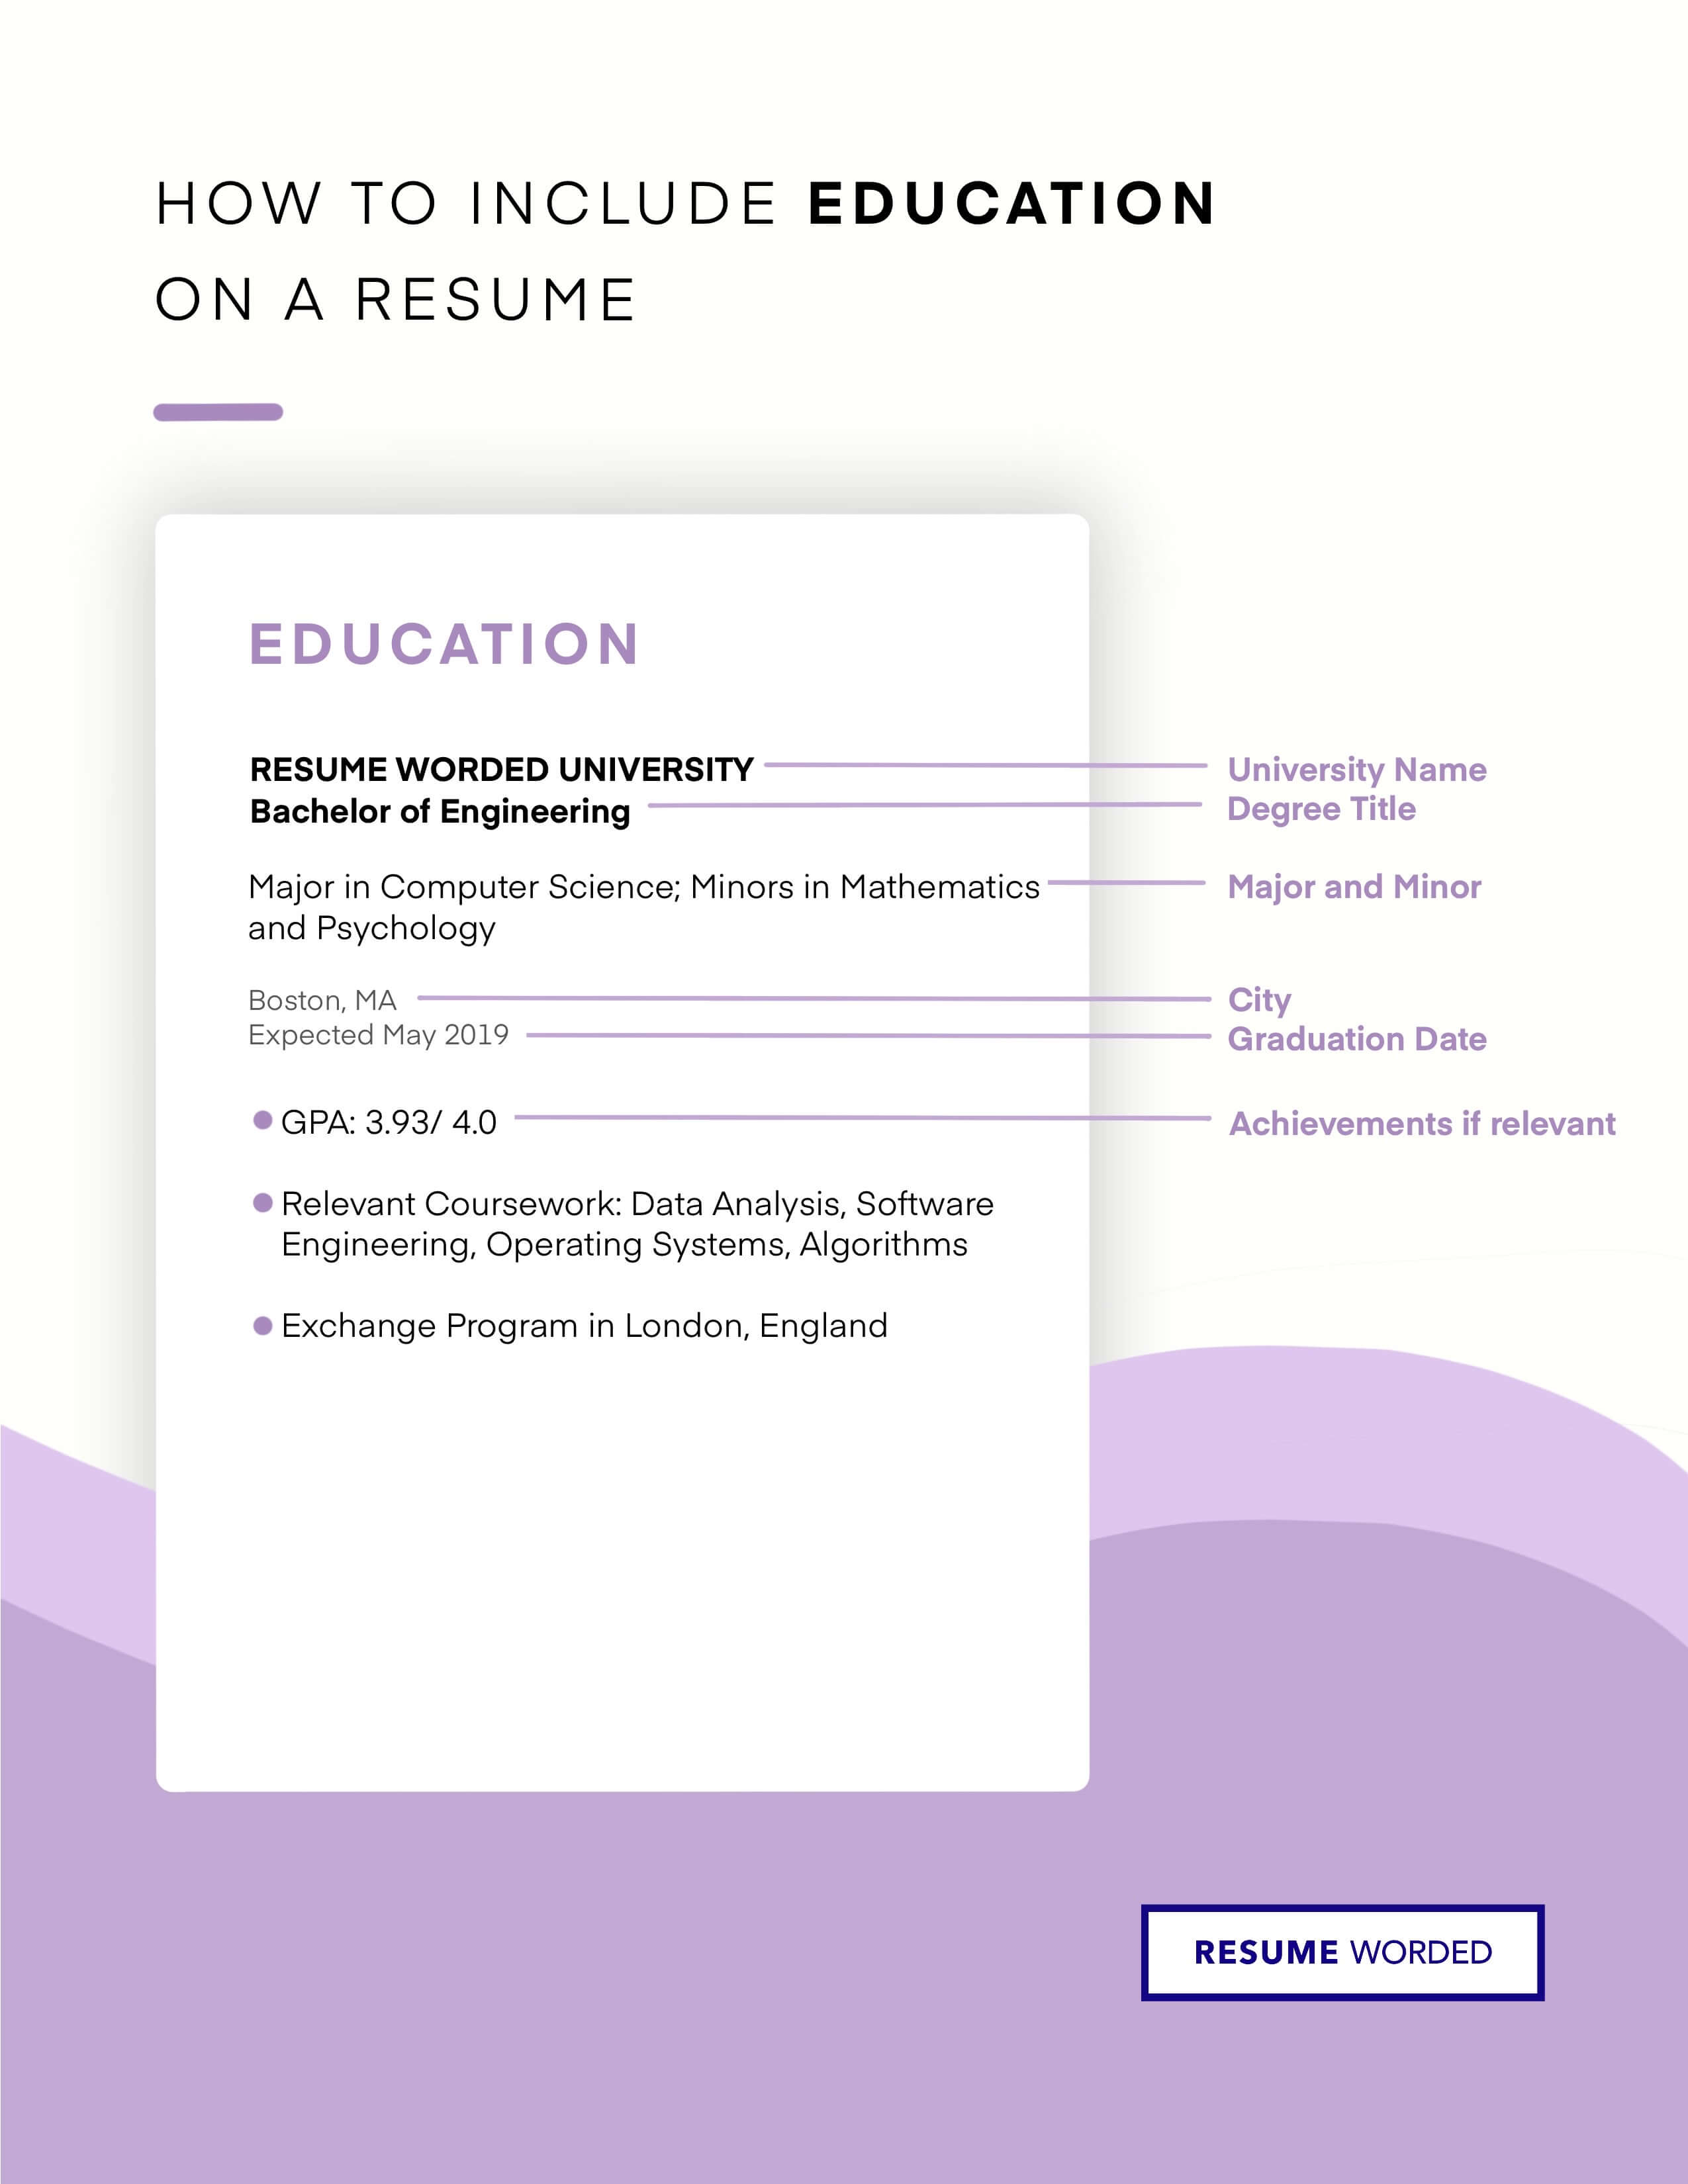 Expand on your education and extra-curriculars. - Junior Copywriter Resume